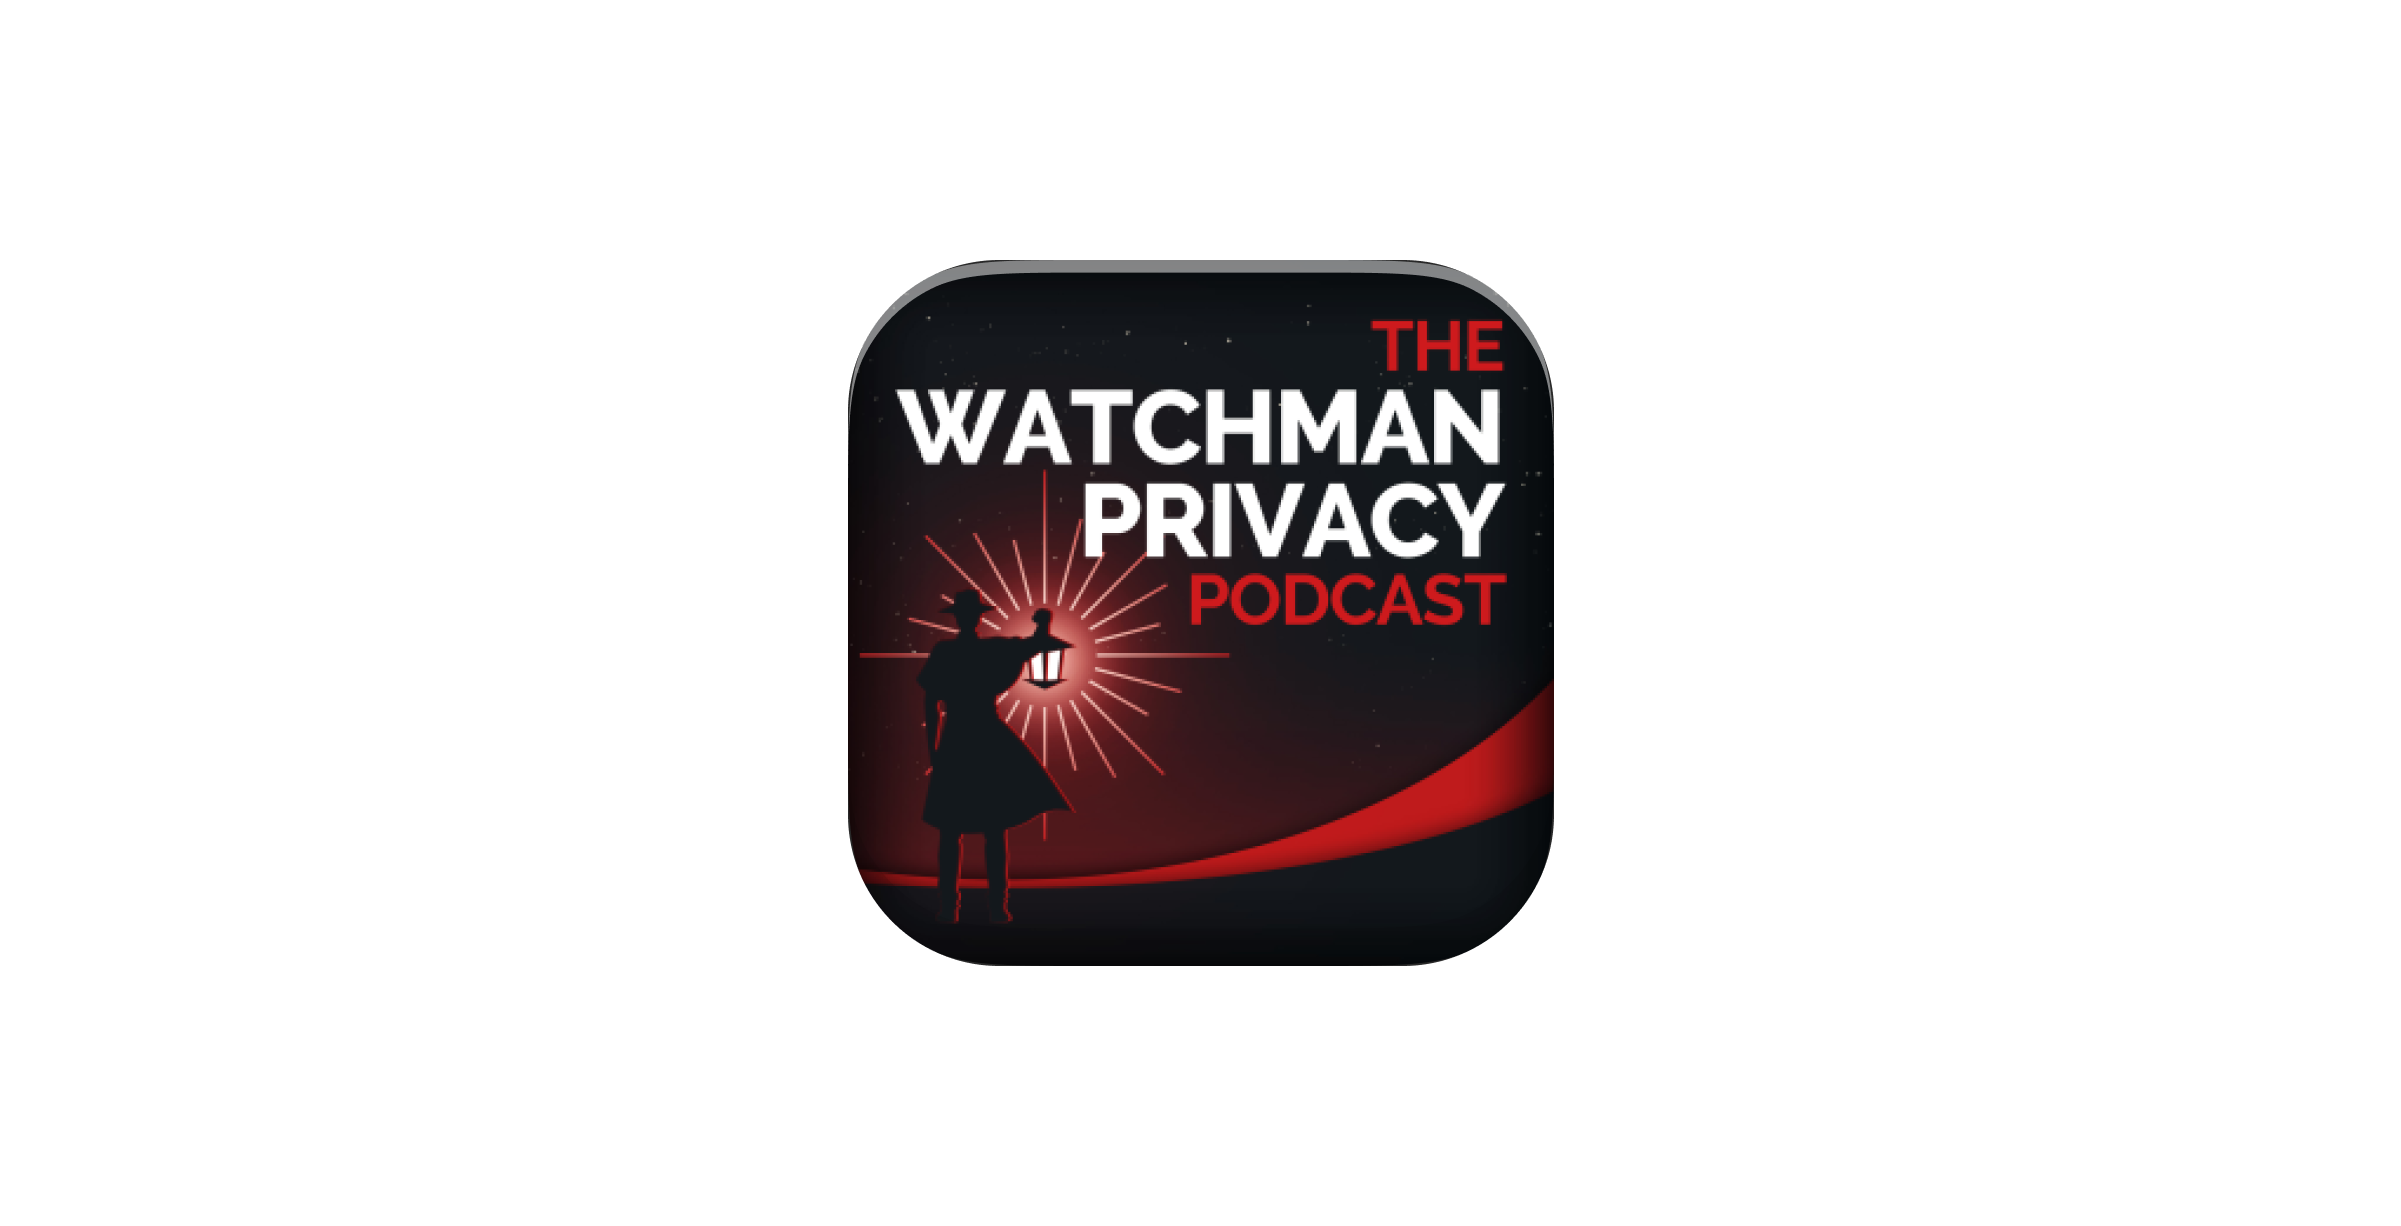 Graphic with Watchman Privacy logo.